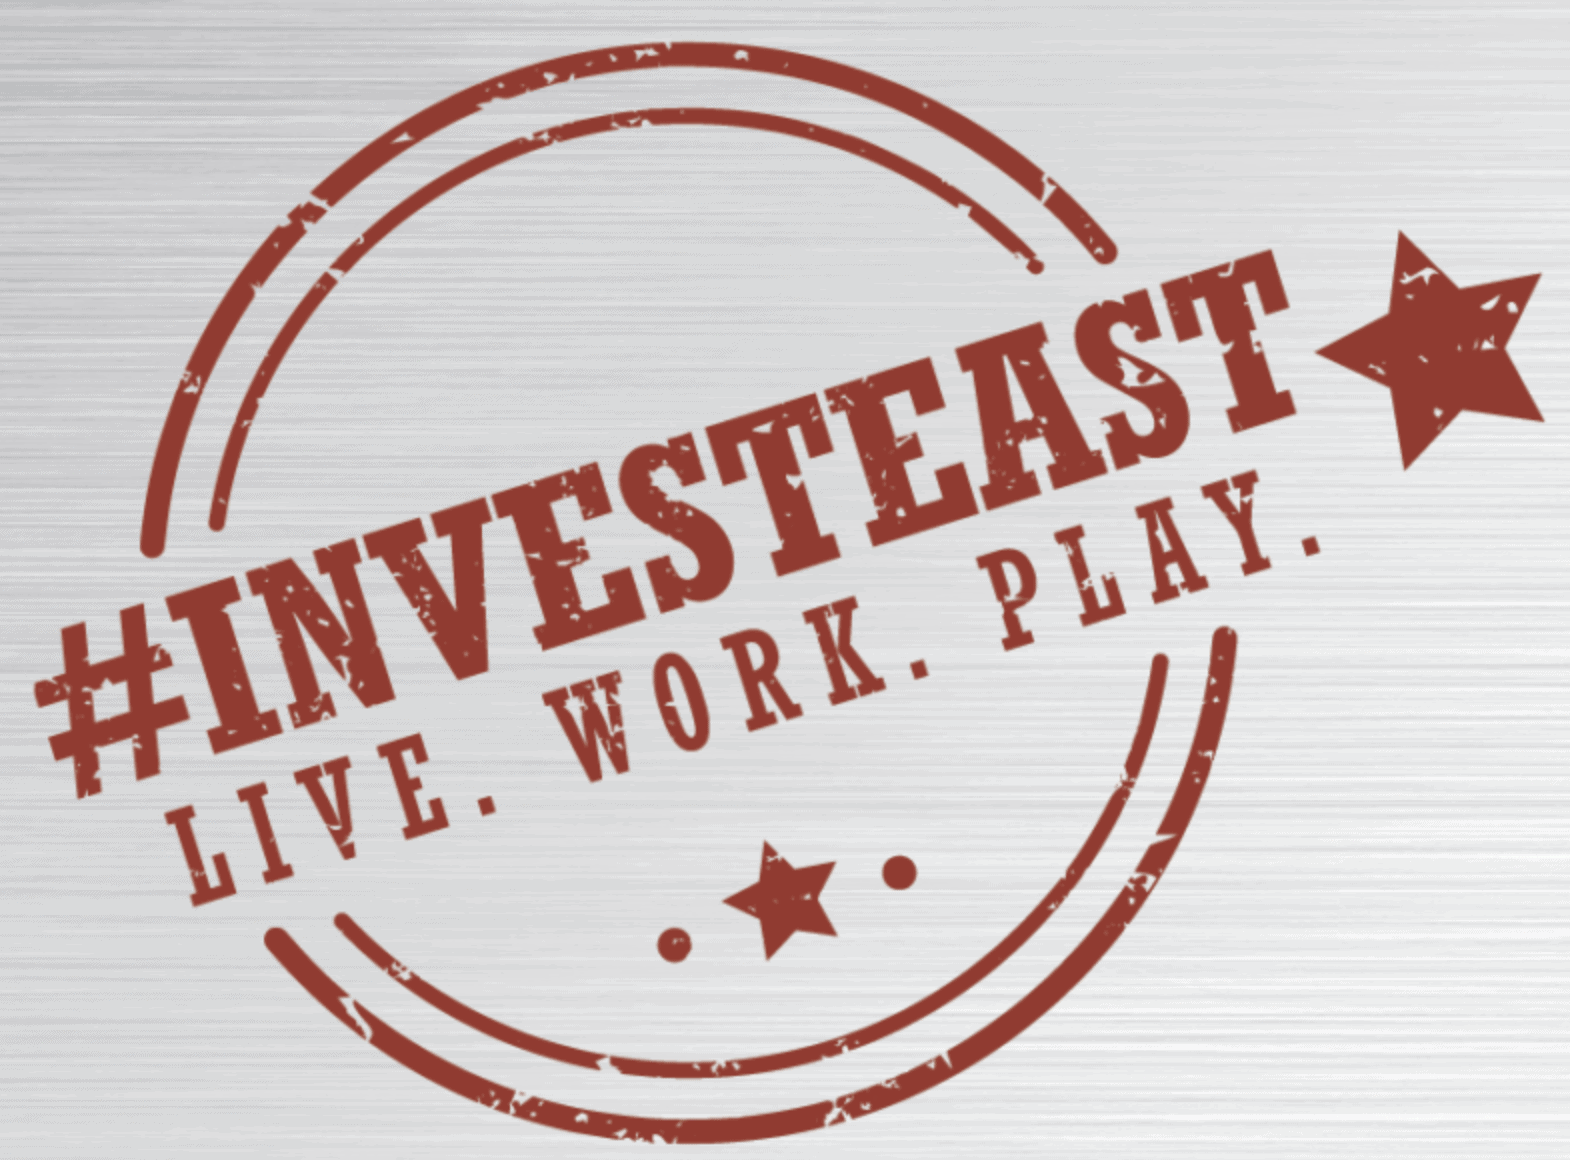 Red circle and star graphics with text reading "#INVESTEAST Live. Work. Play"